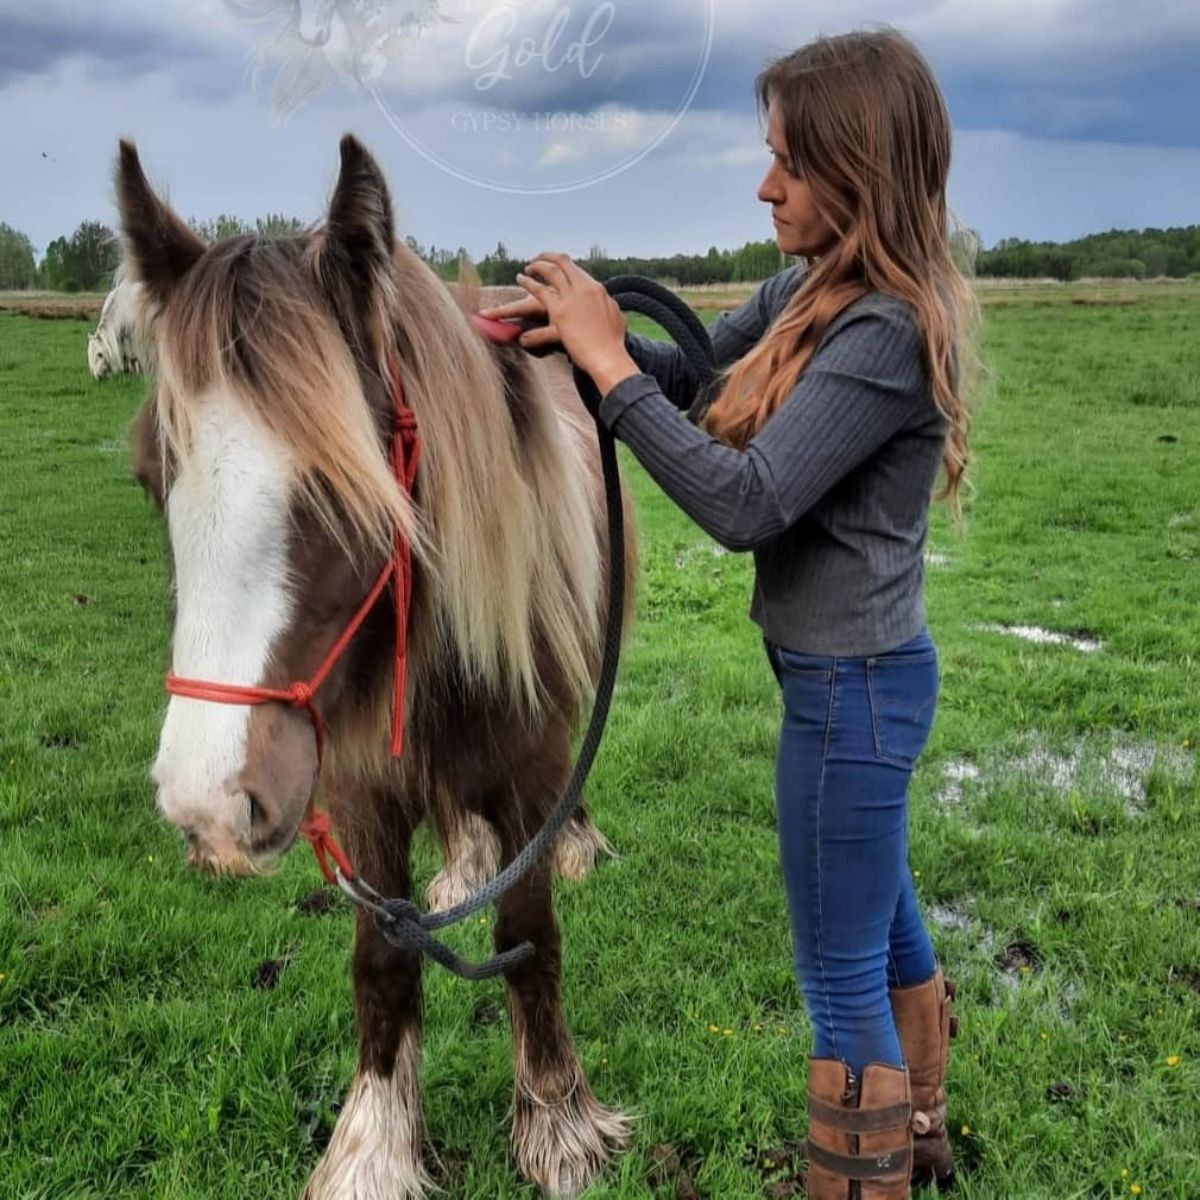 A woman takes care of a Gypsy Cob horse.